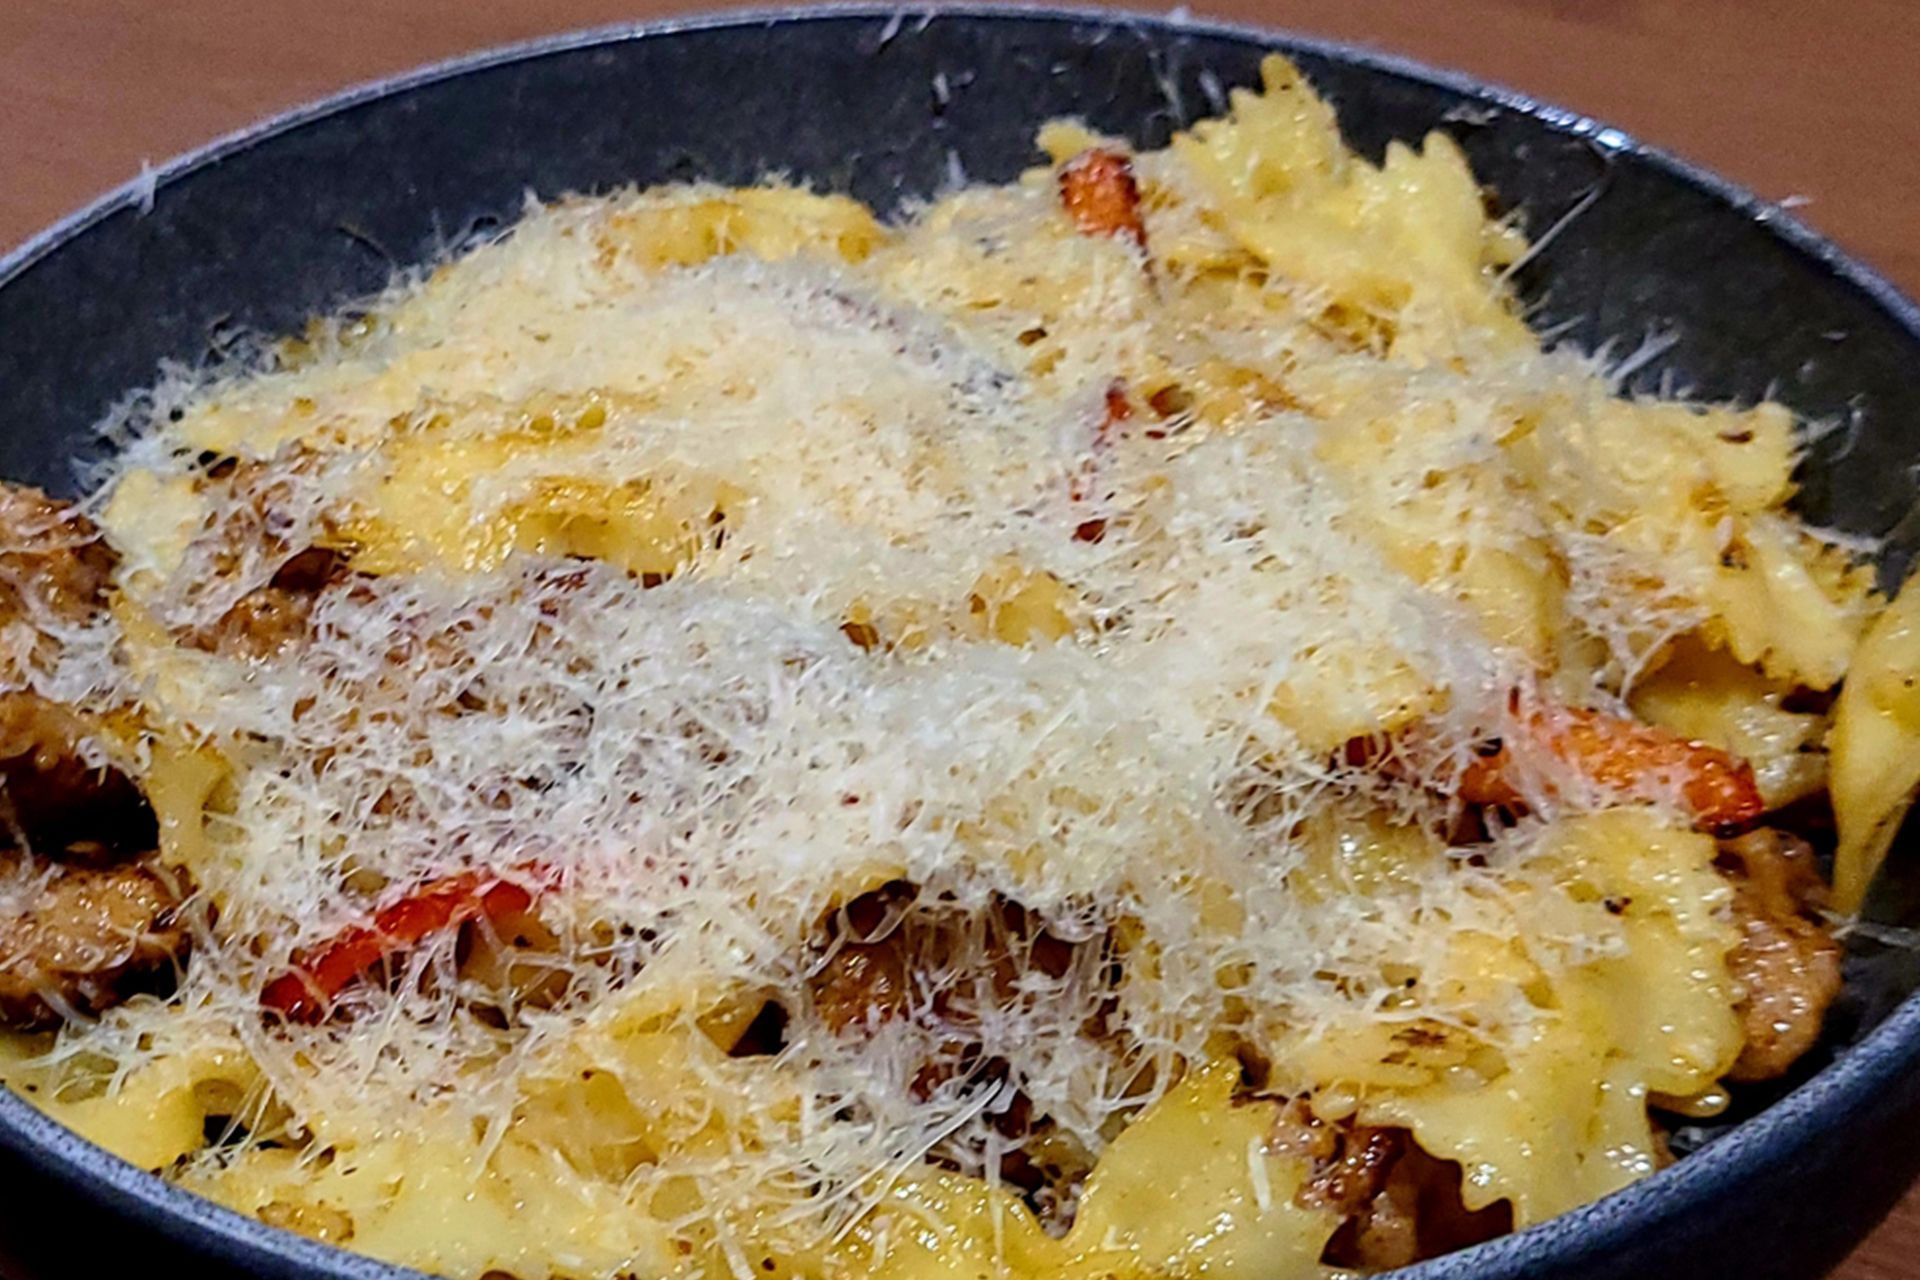 A close up of a pasta dish with cheese on top